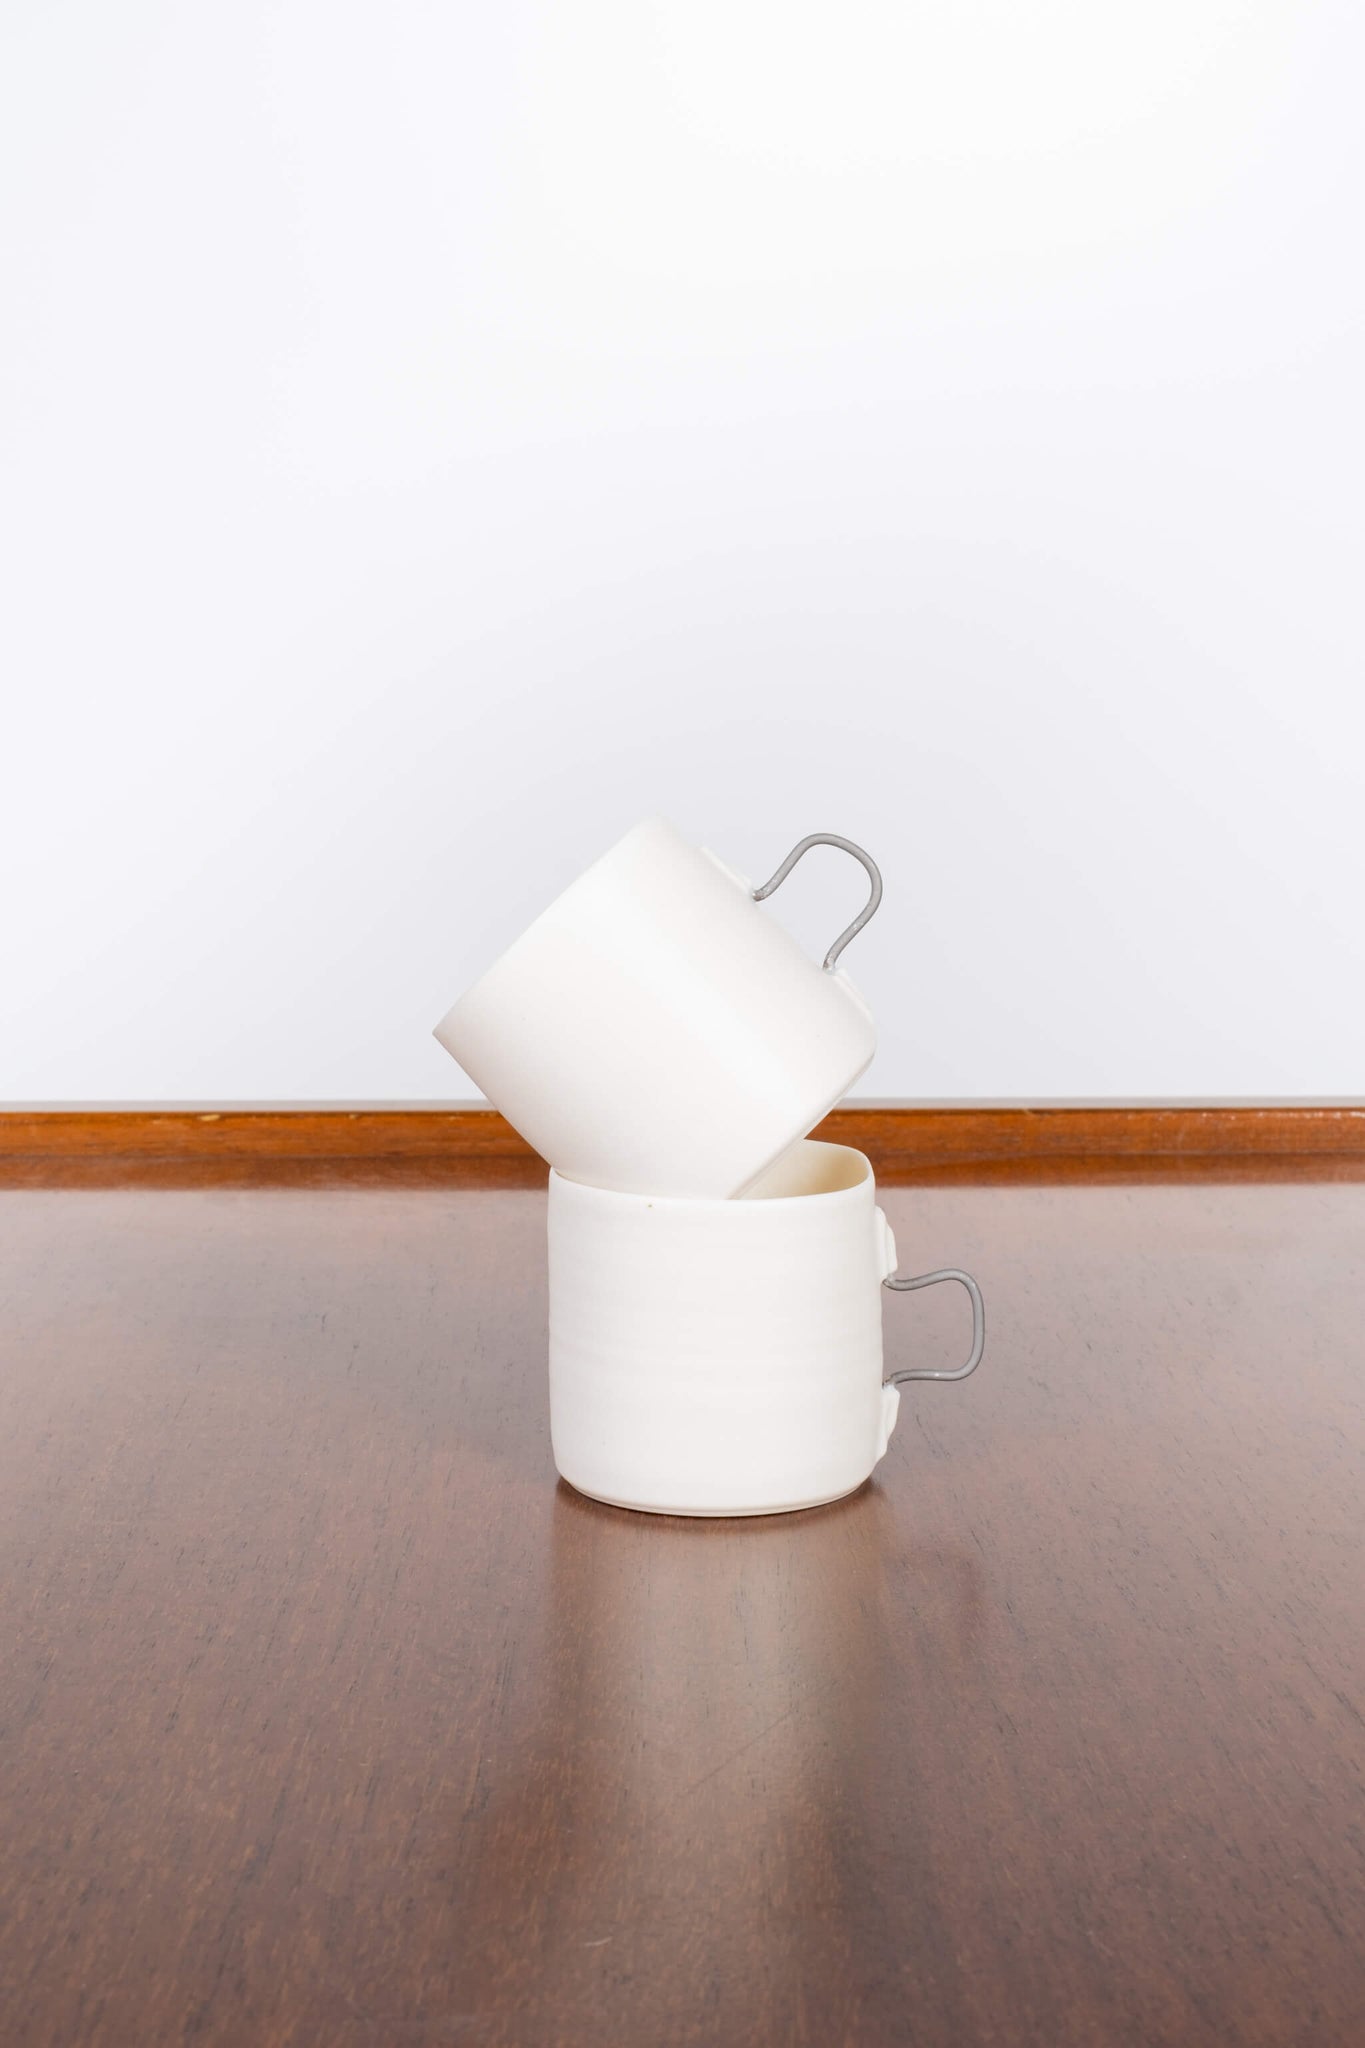 Porcelain Espresso cup with square metal handle, shown stacked